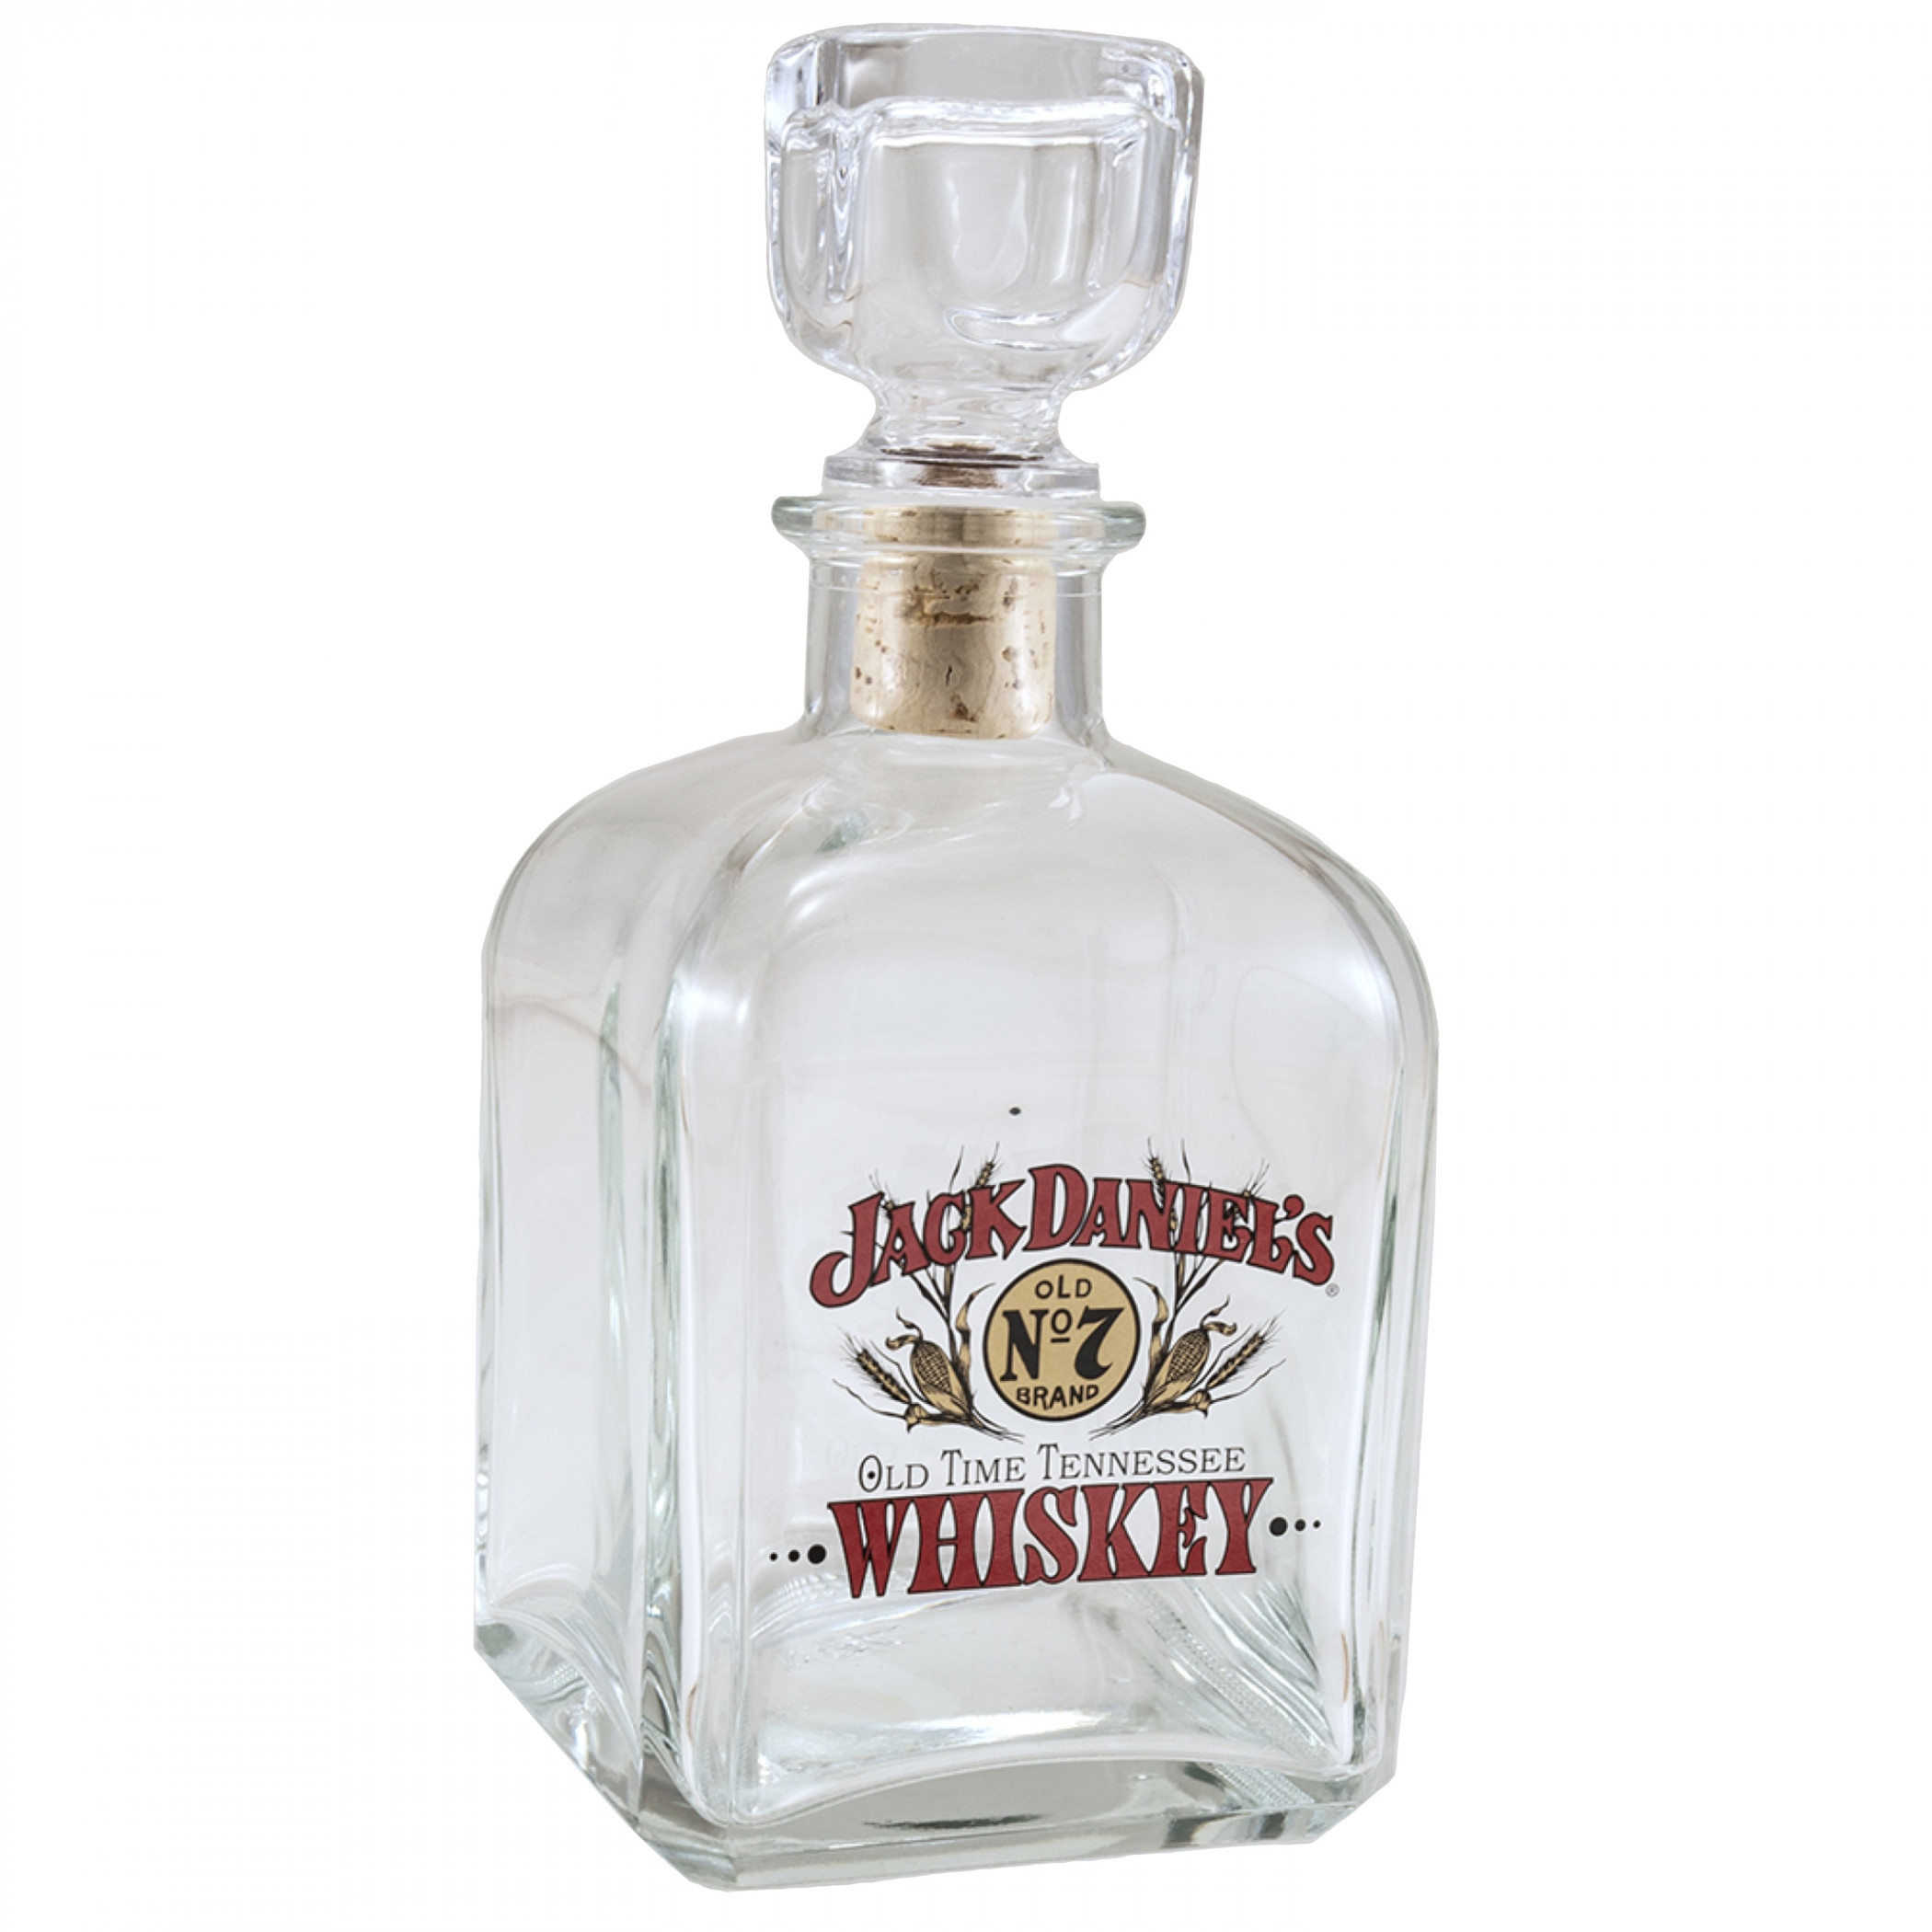 Jack Daniels Old Time Whiskey 25 oz. Decanter